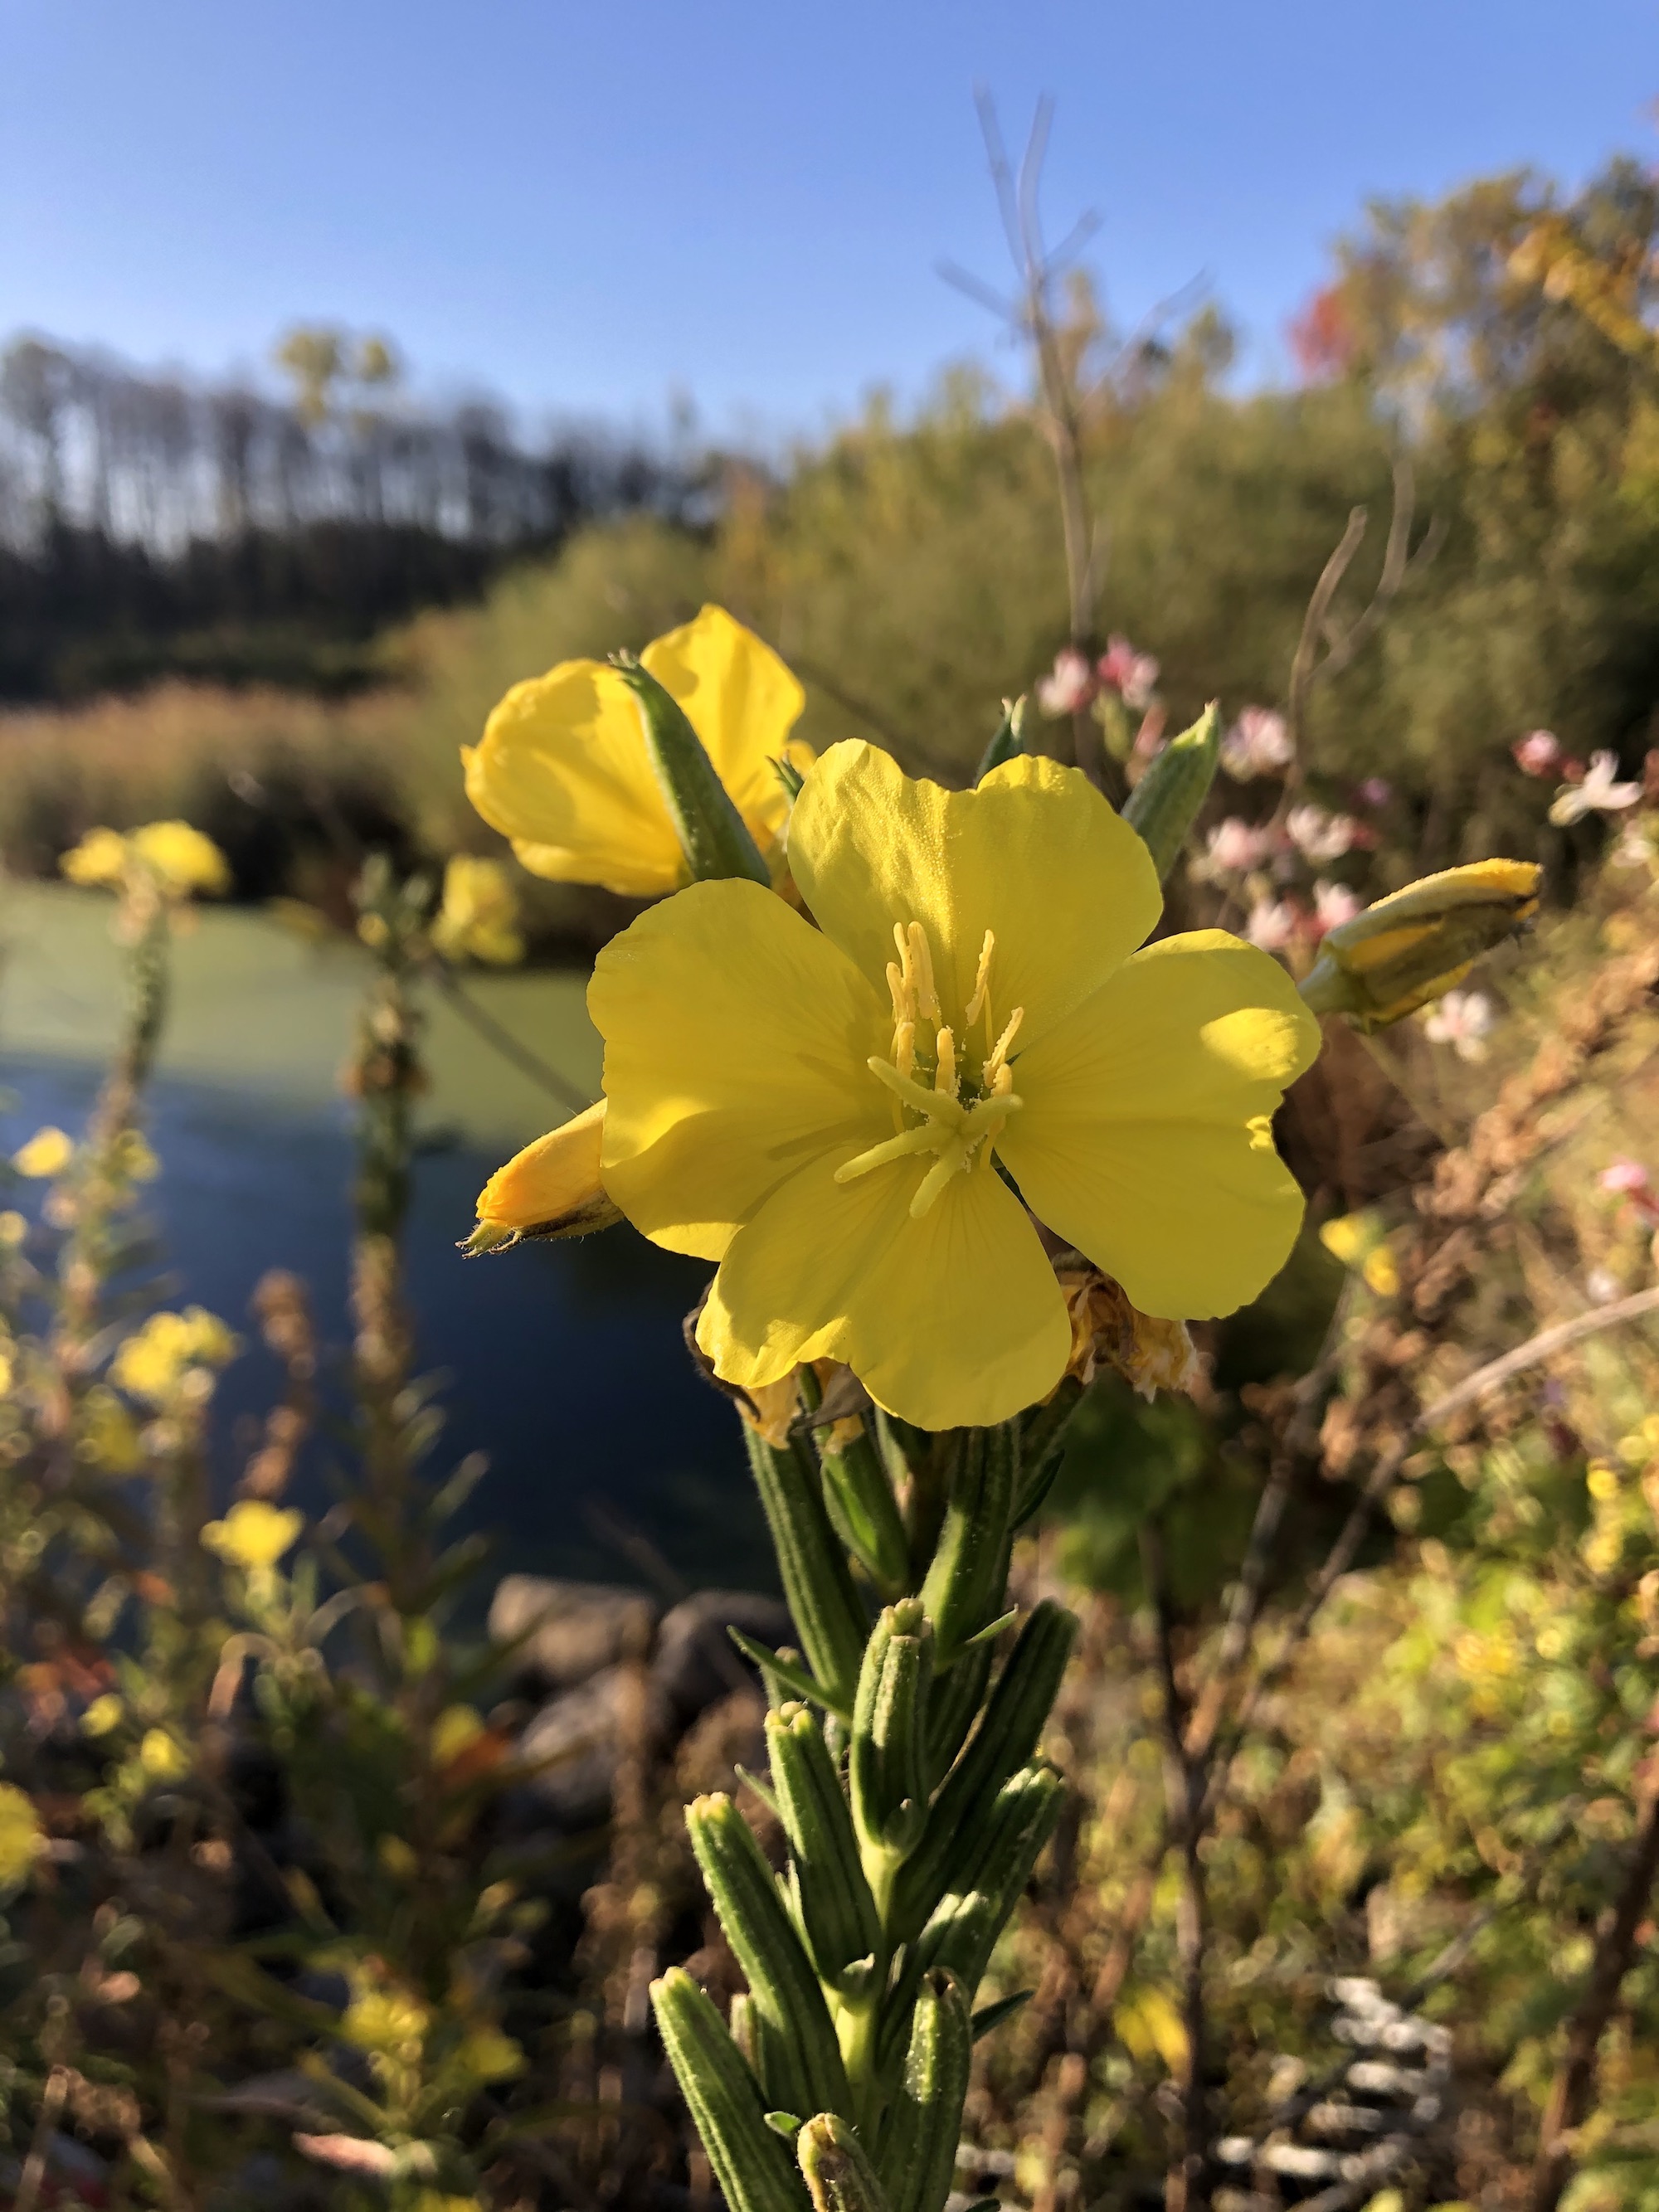 Evening Primrose along shore of the Marion Dunn Pond in Madison, Wisconsin on October 8, 2020.